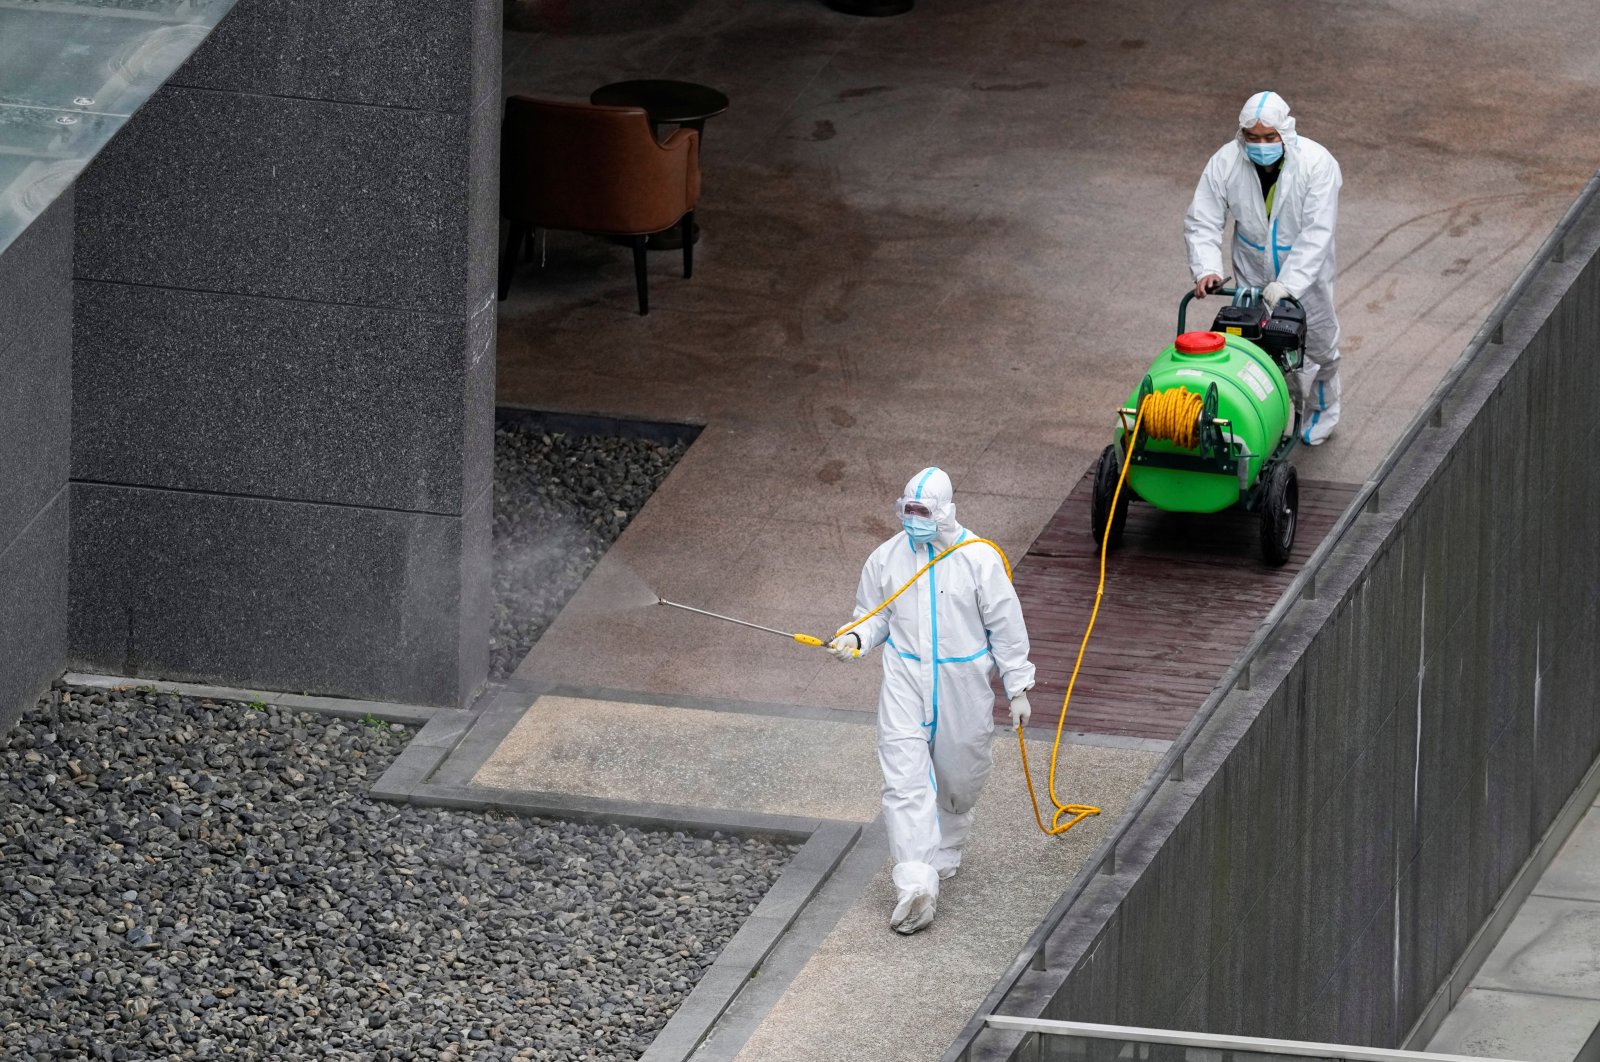 Workers in protective suits spray disinfectant at a community, during the lockdown to curb the spread of the coronavirus in Shanghai, China, April 5, 2022. (Reuters Photo)